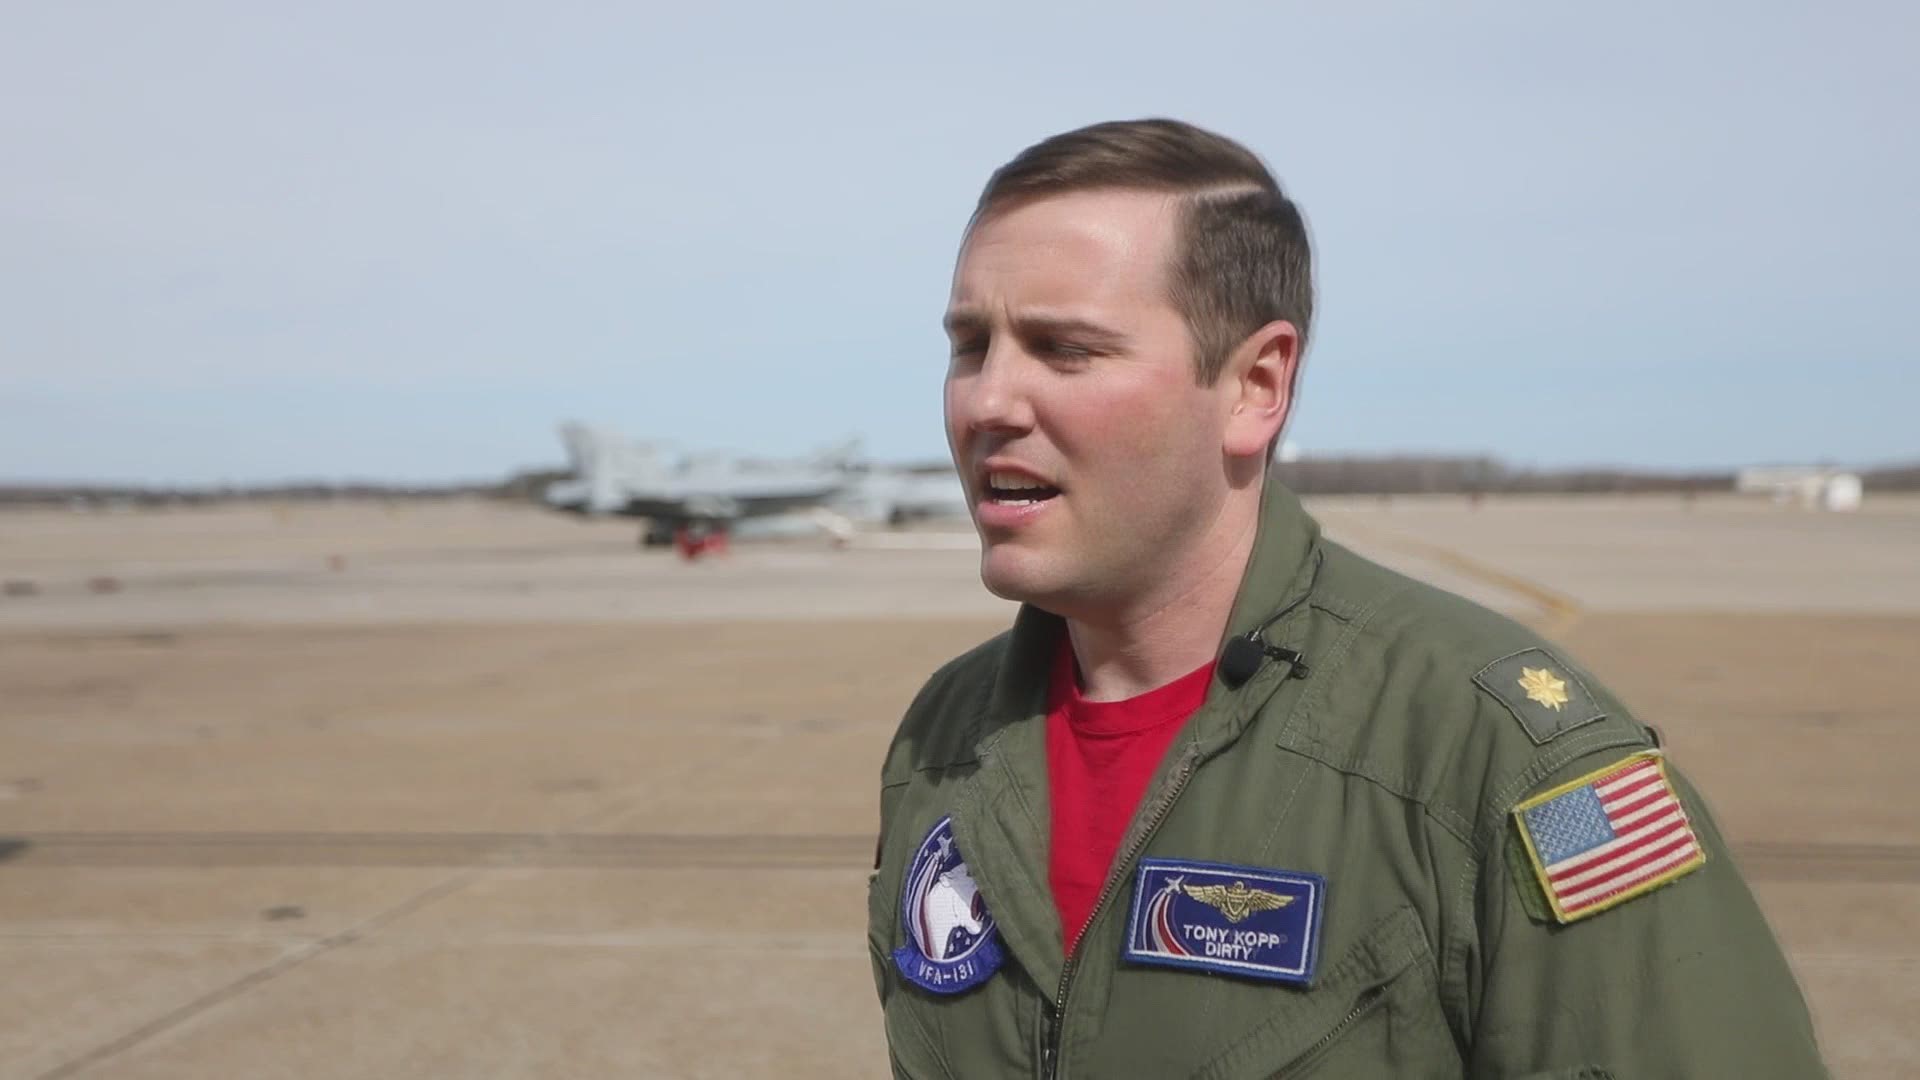 Lieutenant Commander Tony Kopp is a training officer for VFA-131. Listen to why he decided to remain a fighter pilot within the Navy.